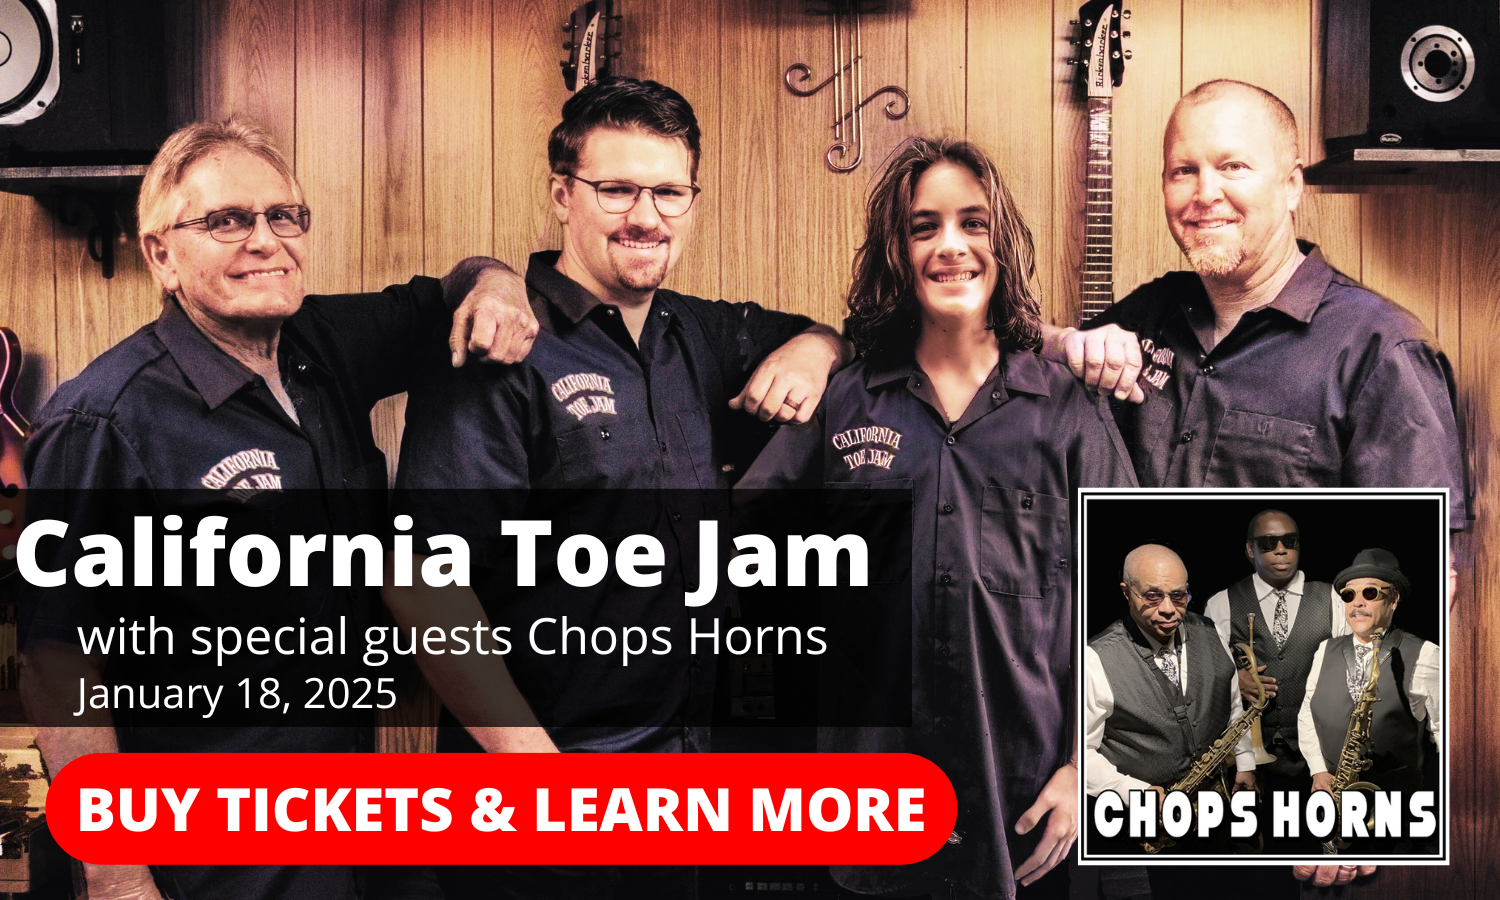 California Toe Jam Good Time Oldies Band with Chops Horns